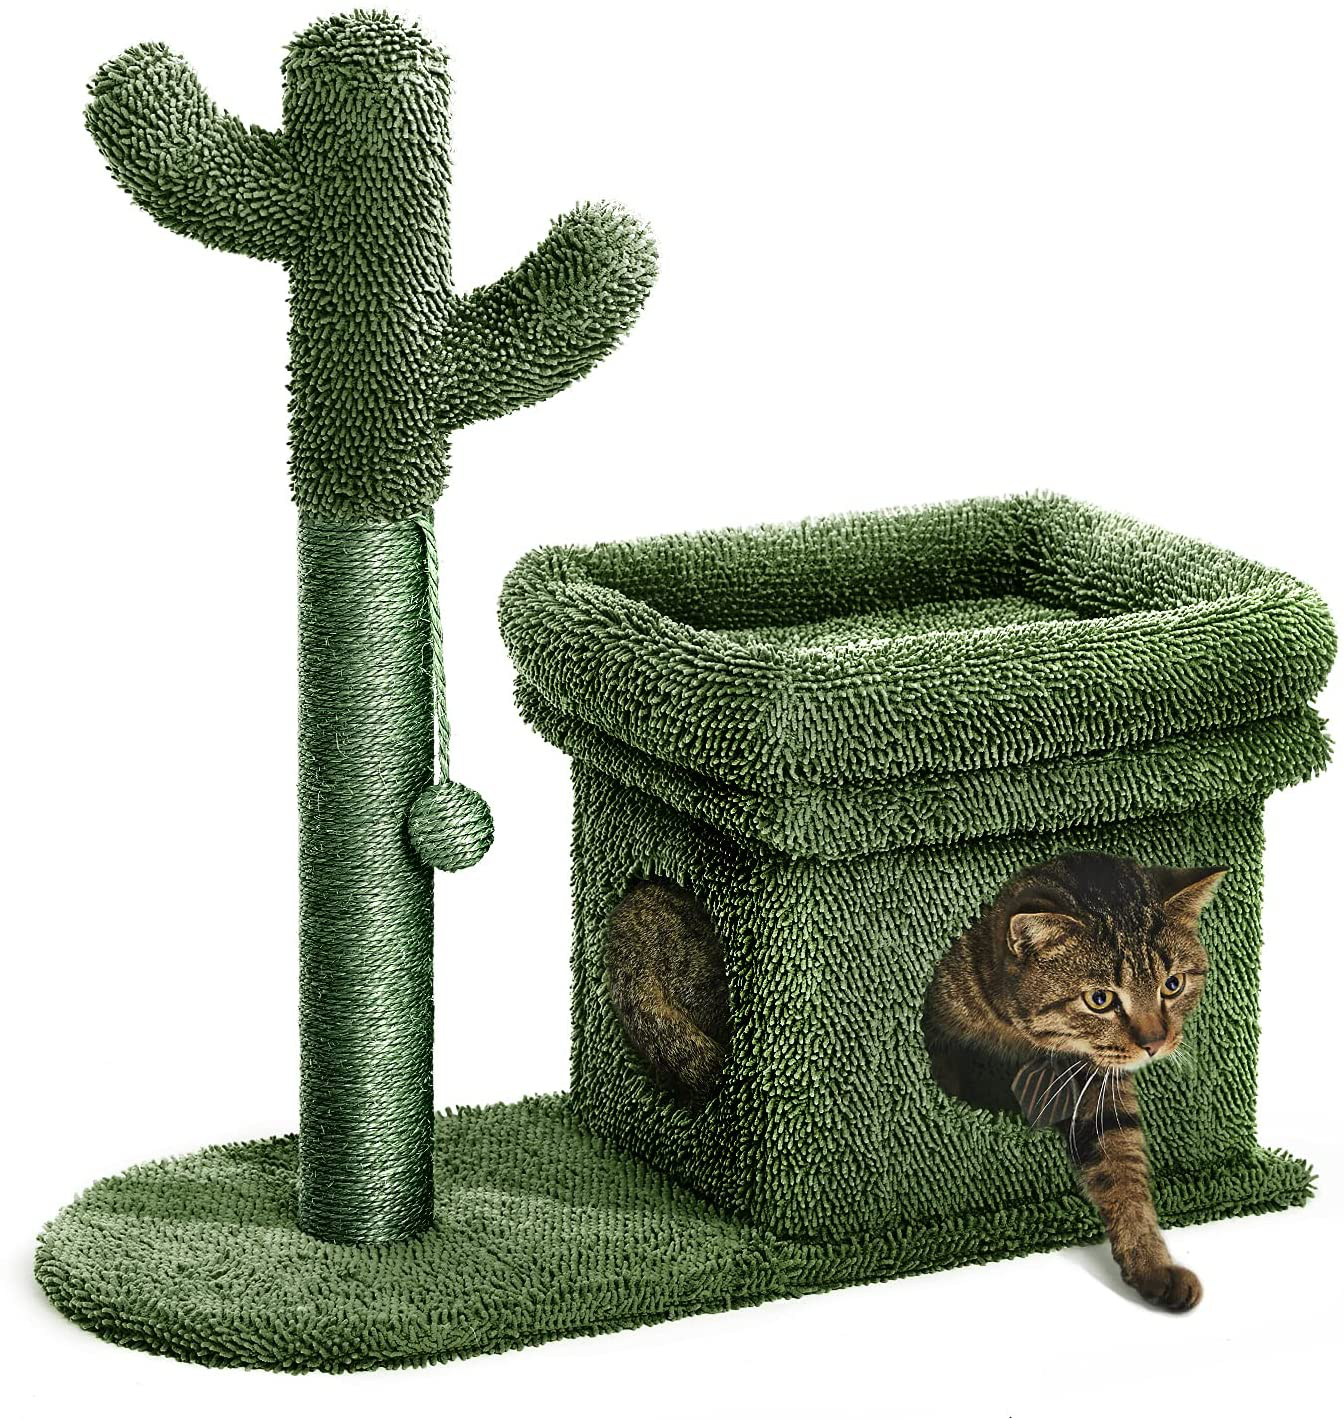 Catinsider 2 in 1 Cat Scratching Post Kitty Condo with Dangling Ball for Small Cats Green Animals & Pet Supplies > Pet Supplies > Cat Supplies > Cat Furniture Catinsider   